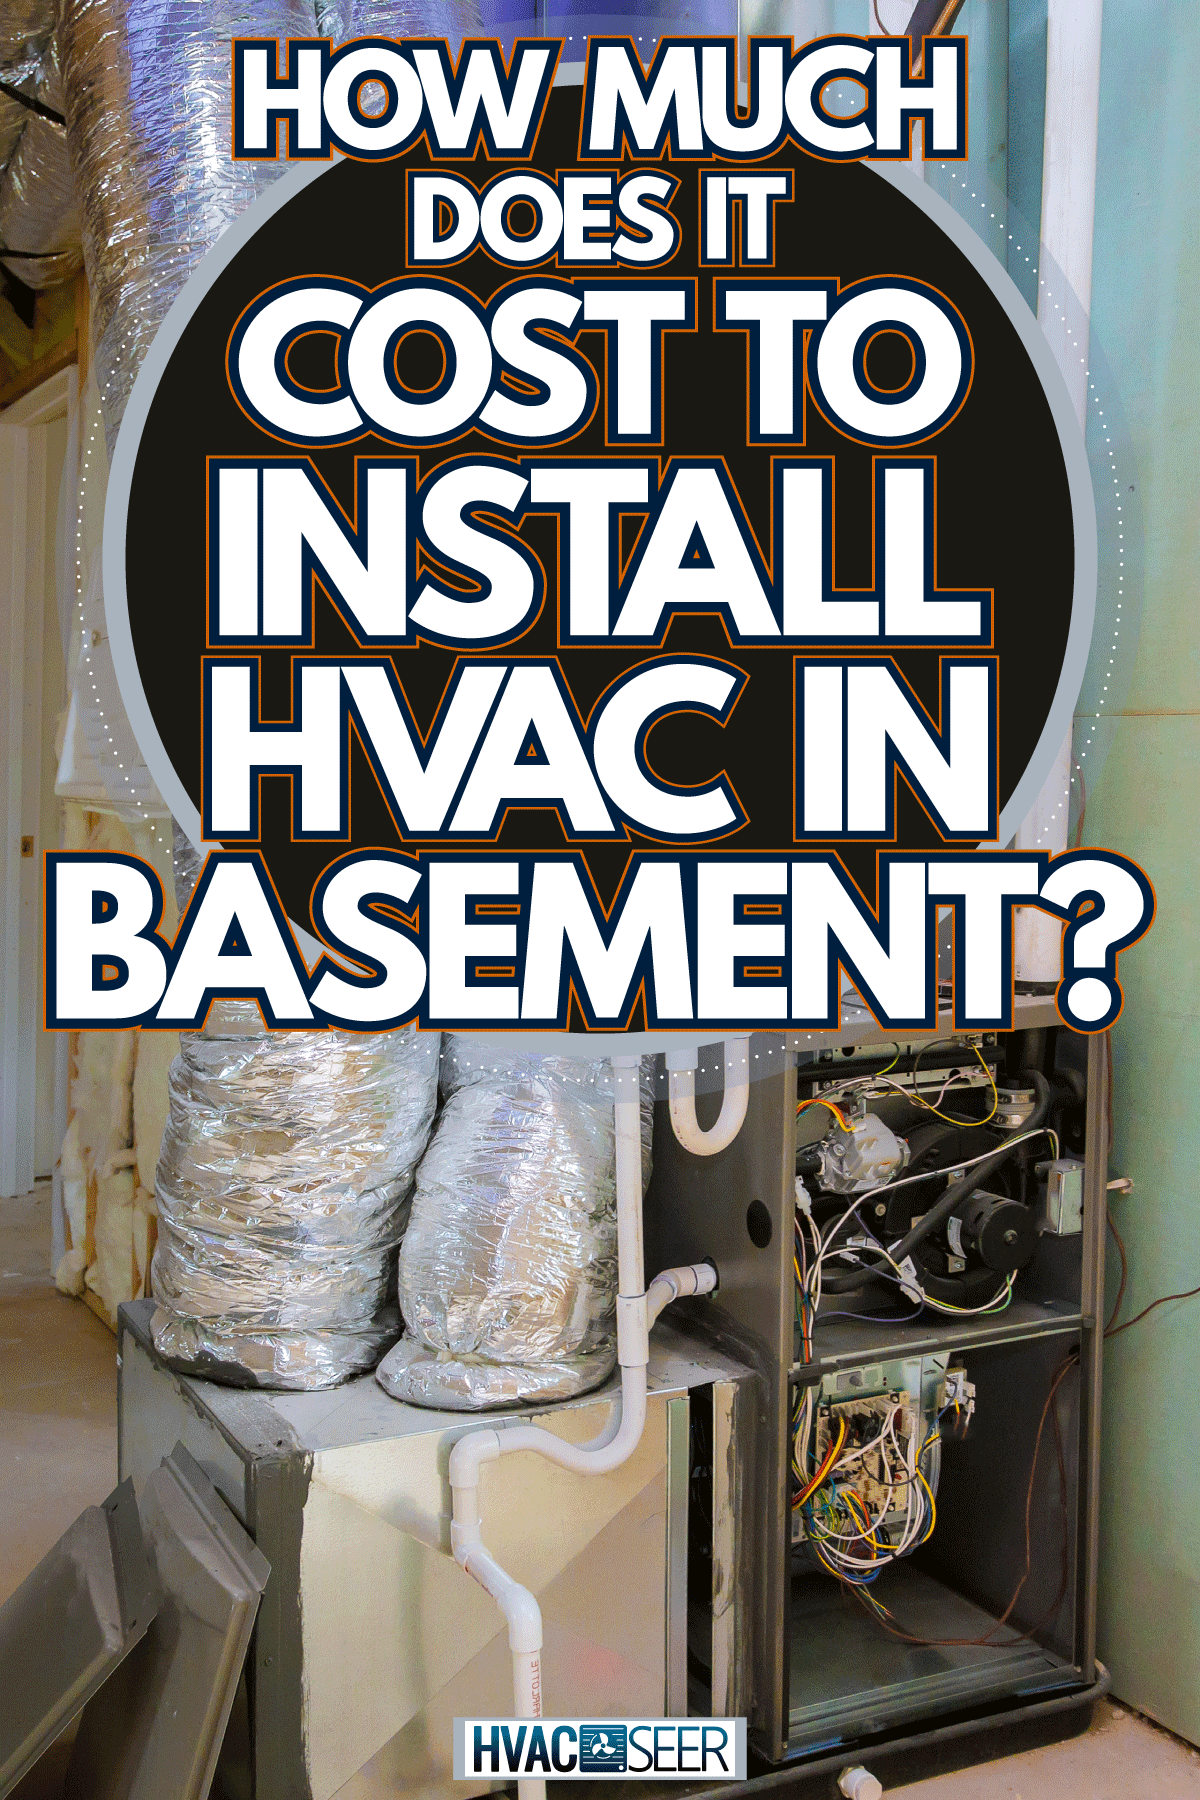 A long air duct leading to the rooms upstairs and a furnace on the side, How Much Does It Cost To Install HVAC In Basement?